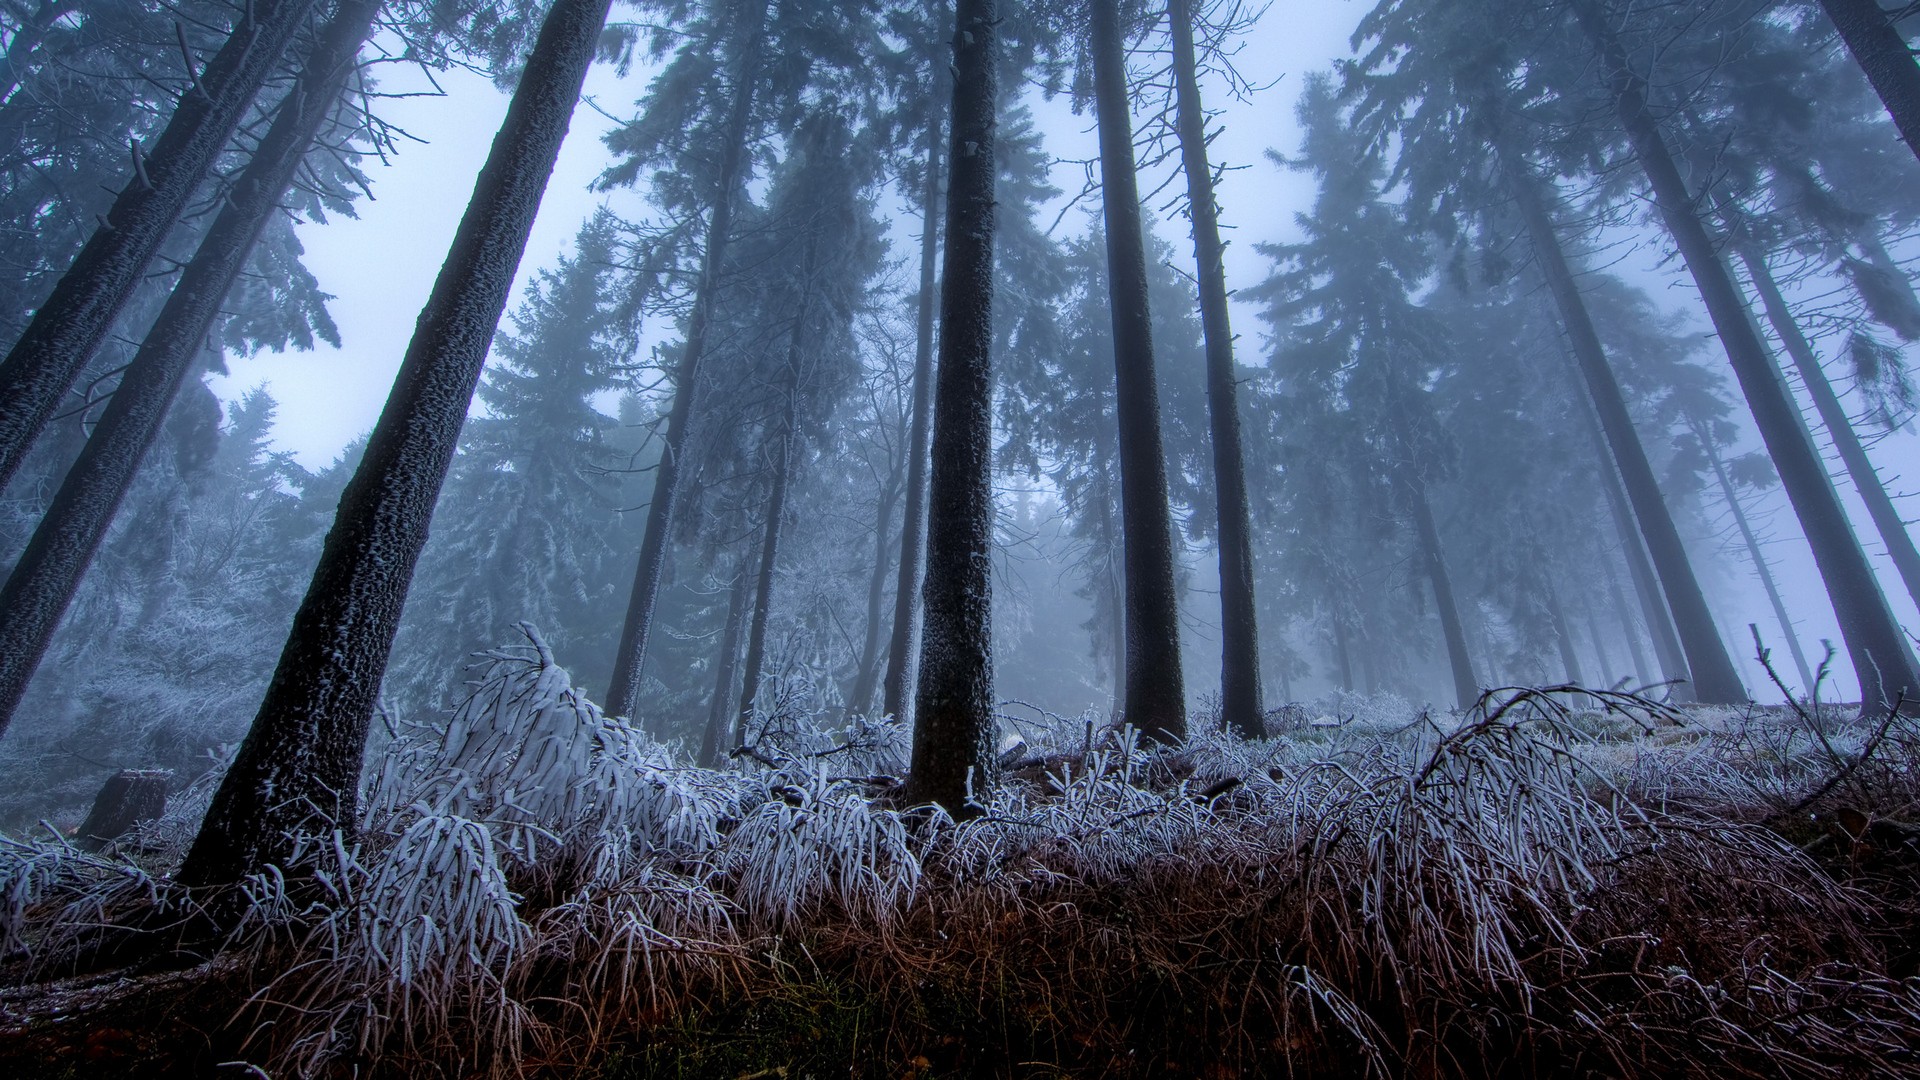 General 1920x1080 nature trees mist winter forest white cold ice snow plants